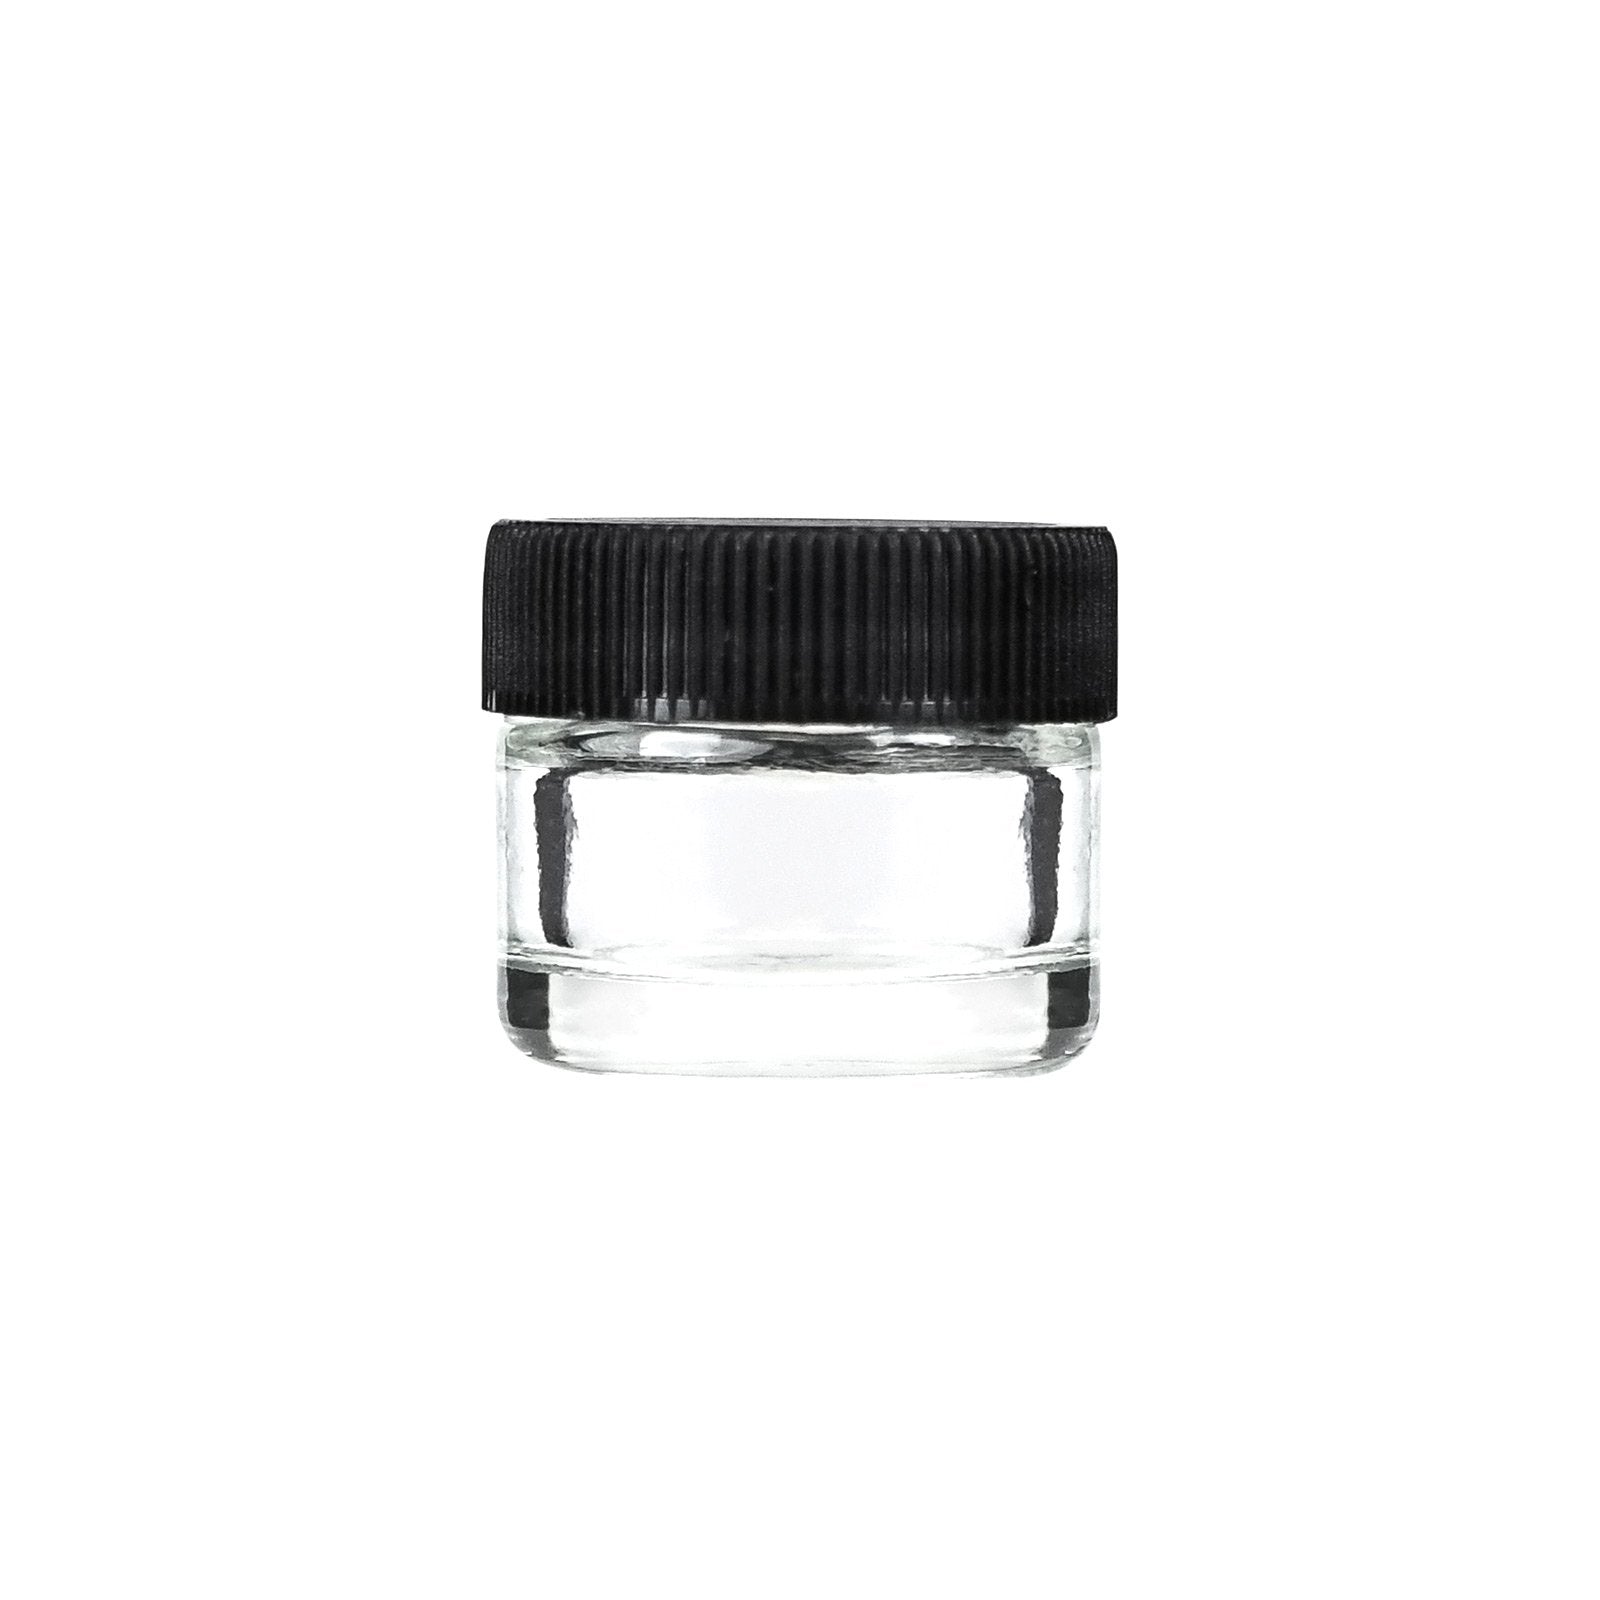 5ml Glass Screw Top Concentrate Container Black Cap - 1 Gram - 1 Count